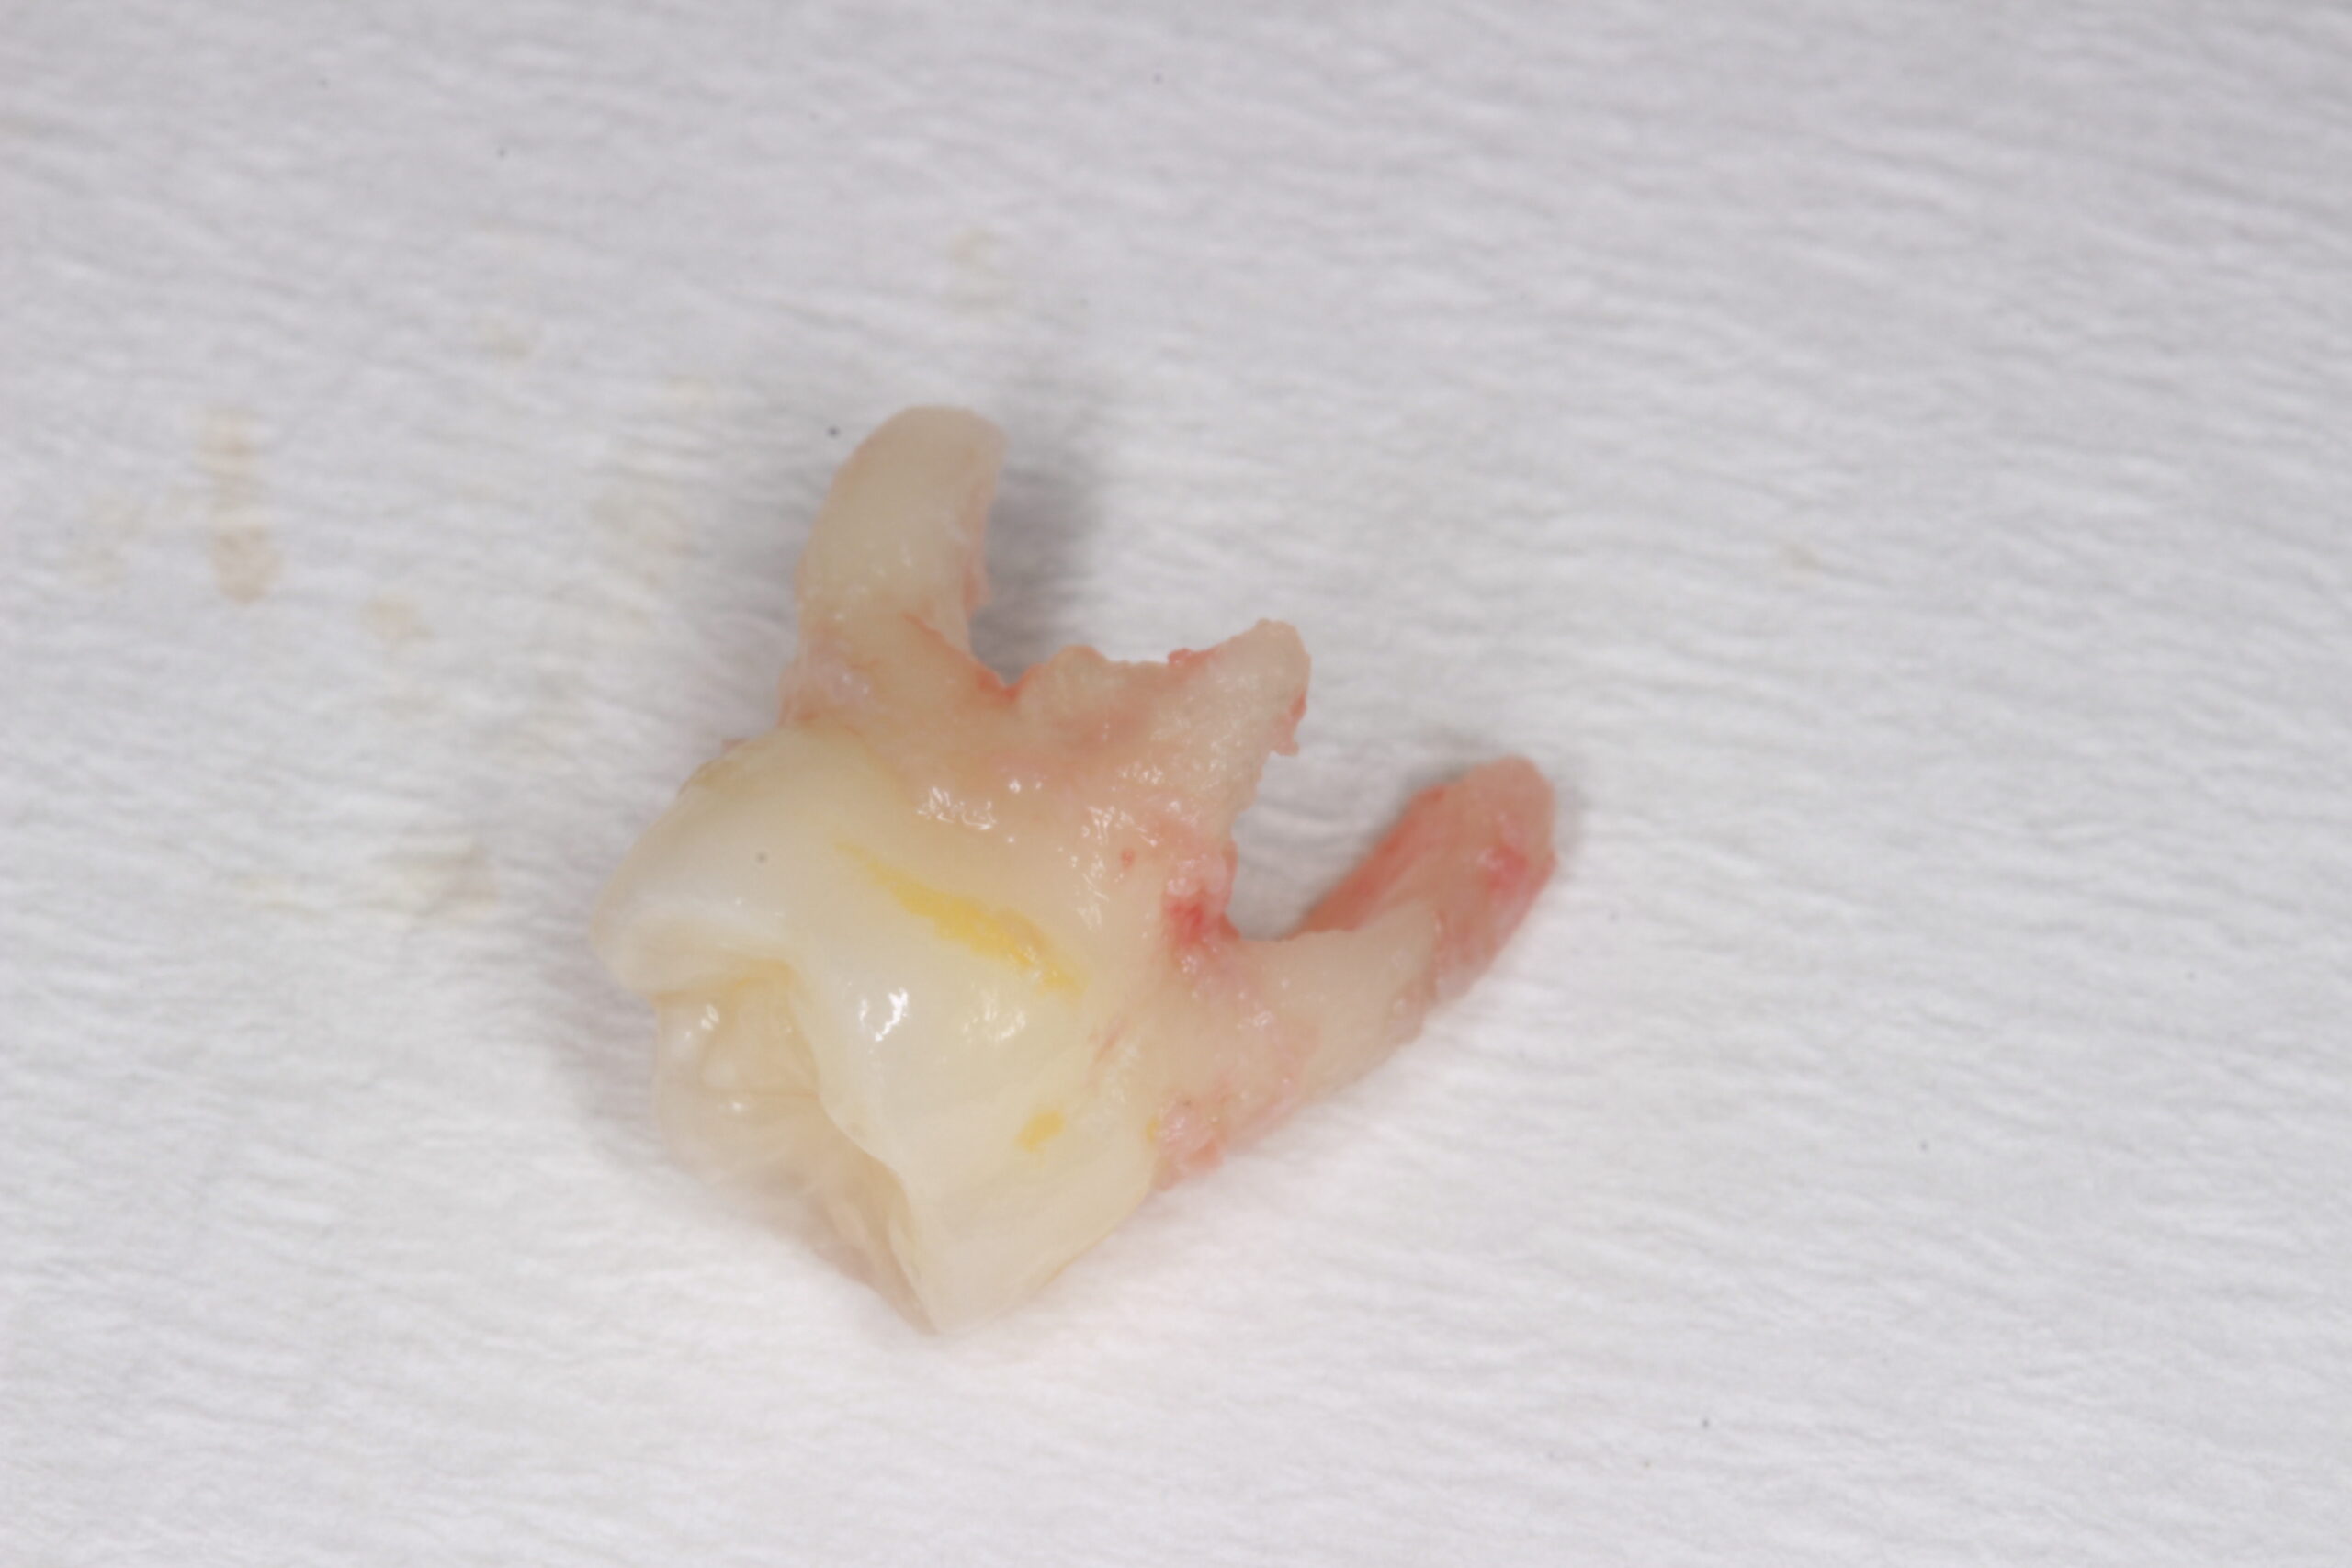 A baby tooth showing the root